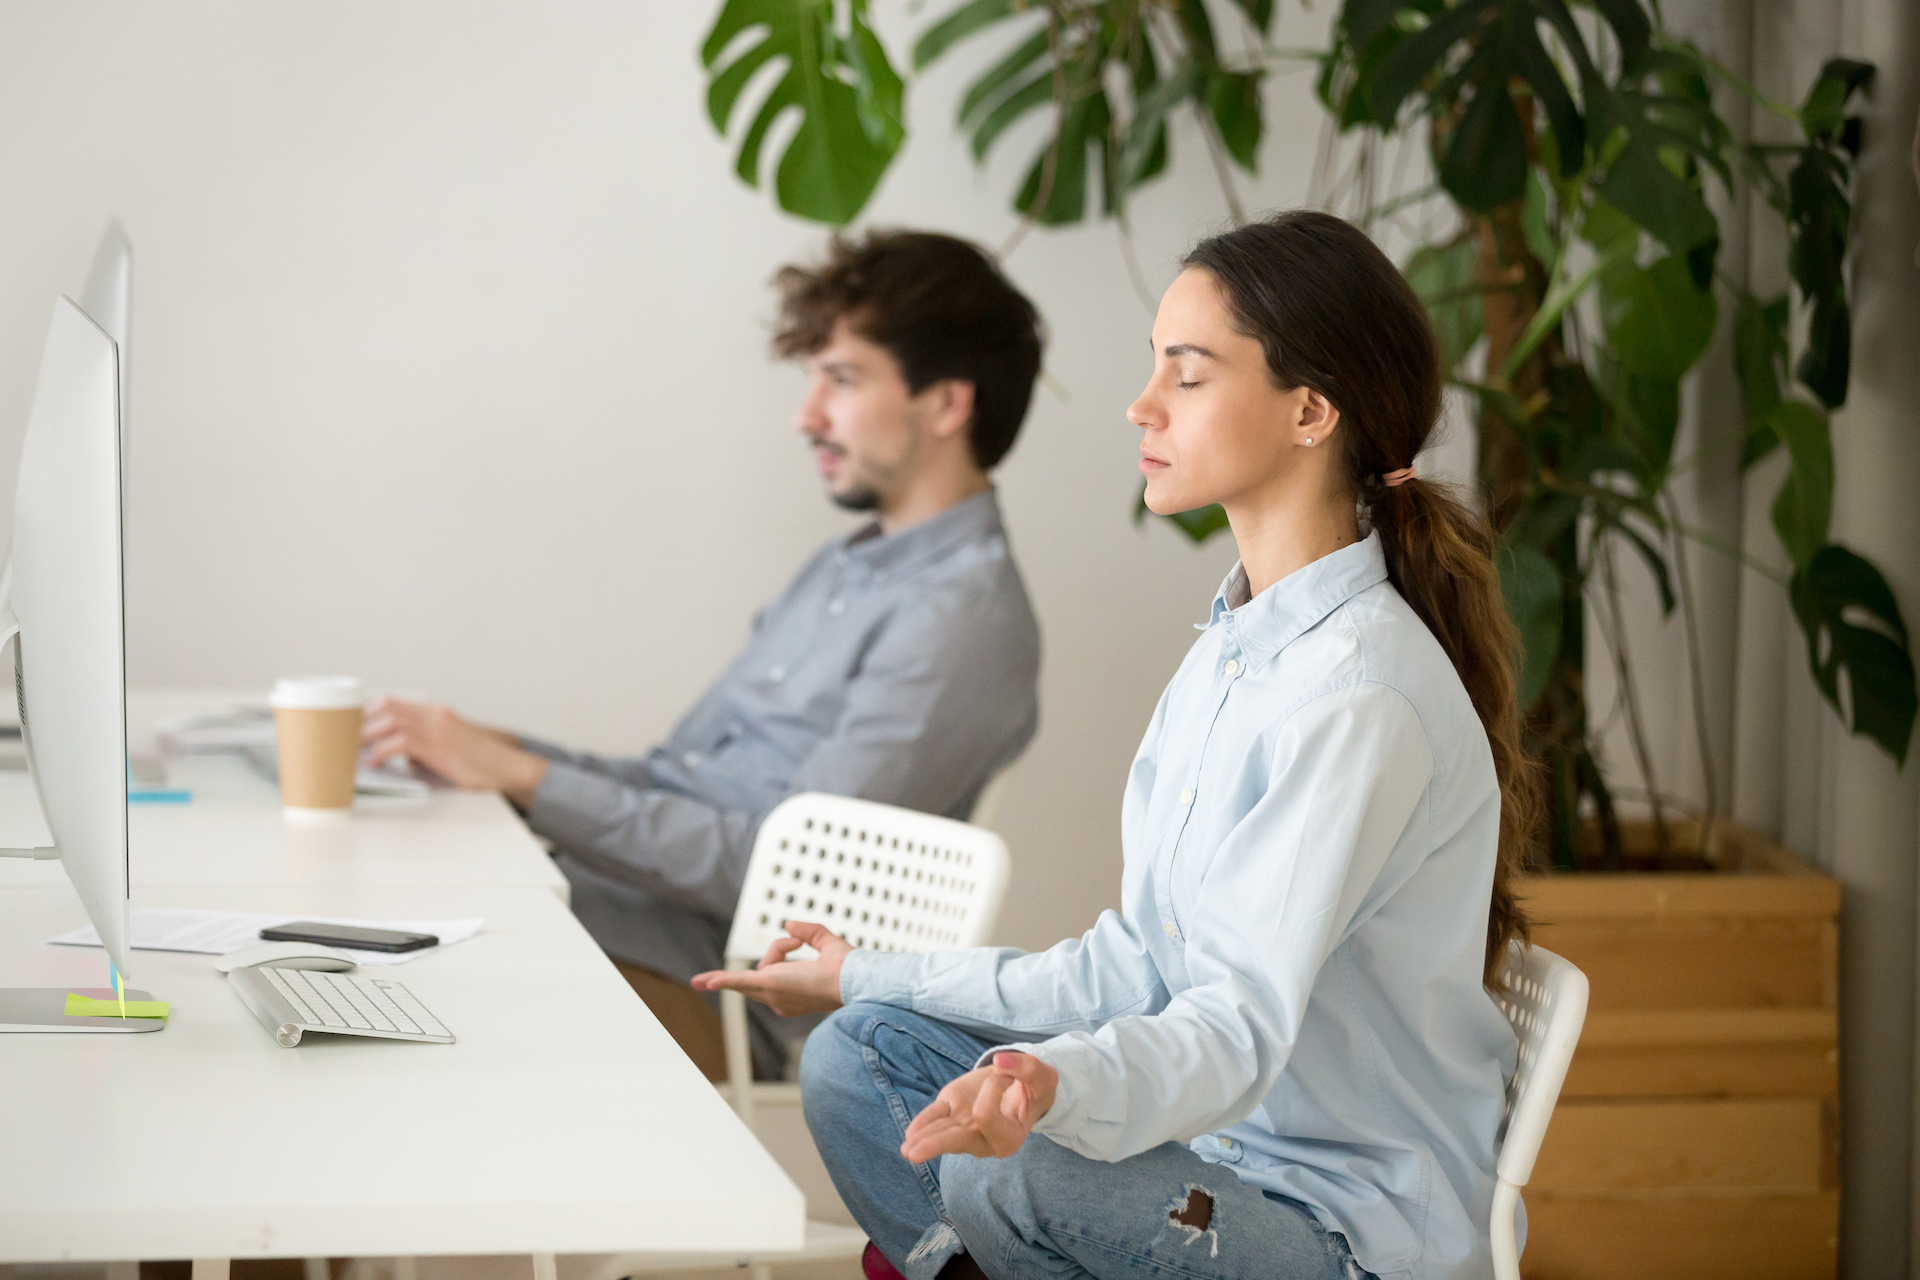 Man and woman in shirts and jeans meditating at a work desk in front of a computer screen